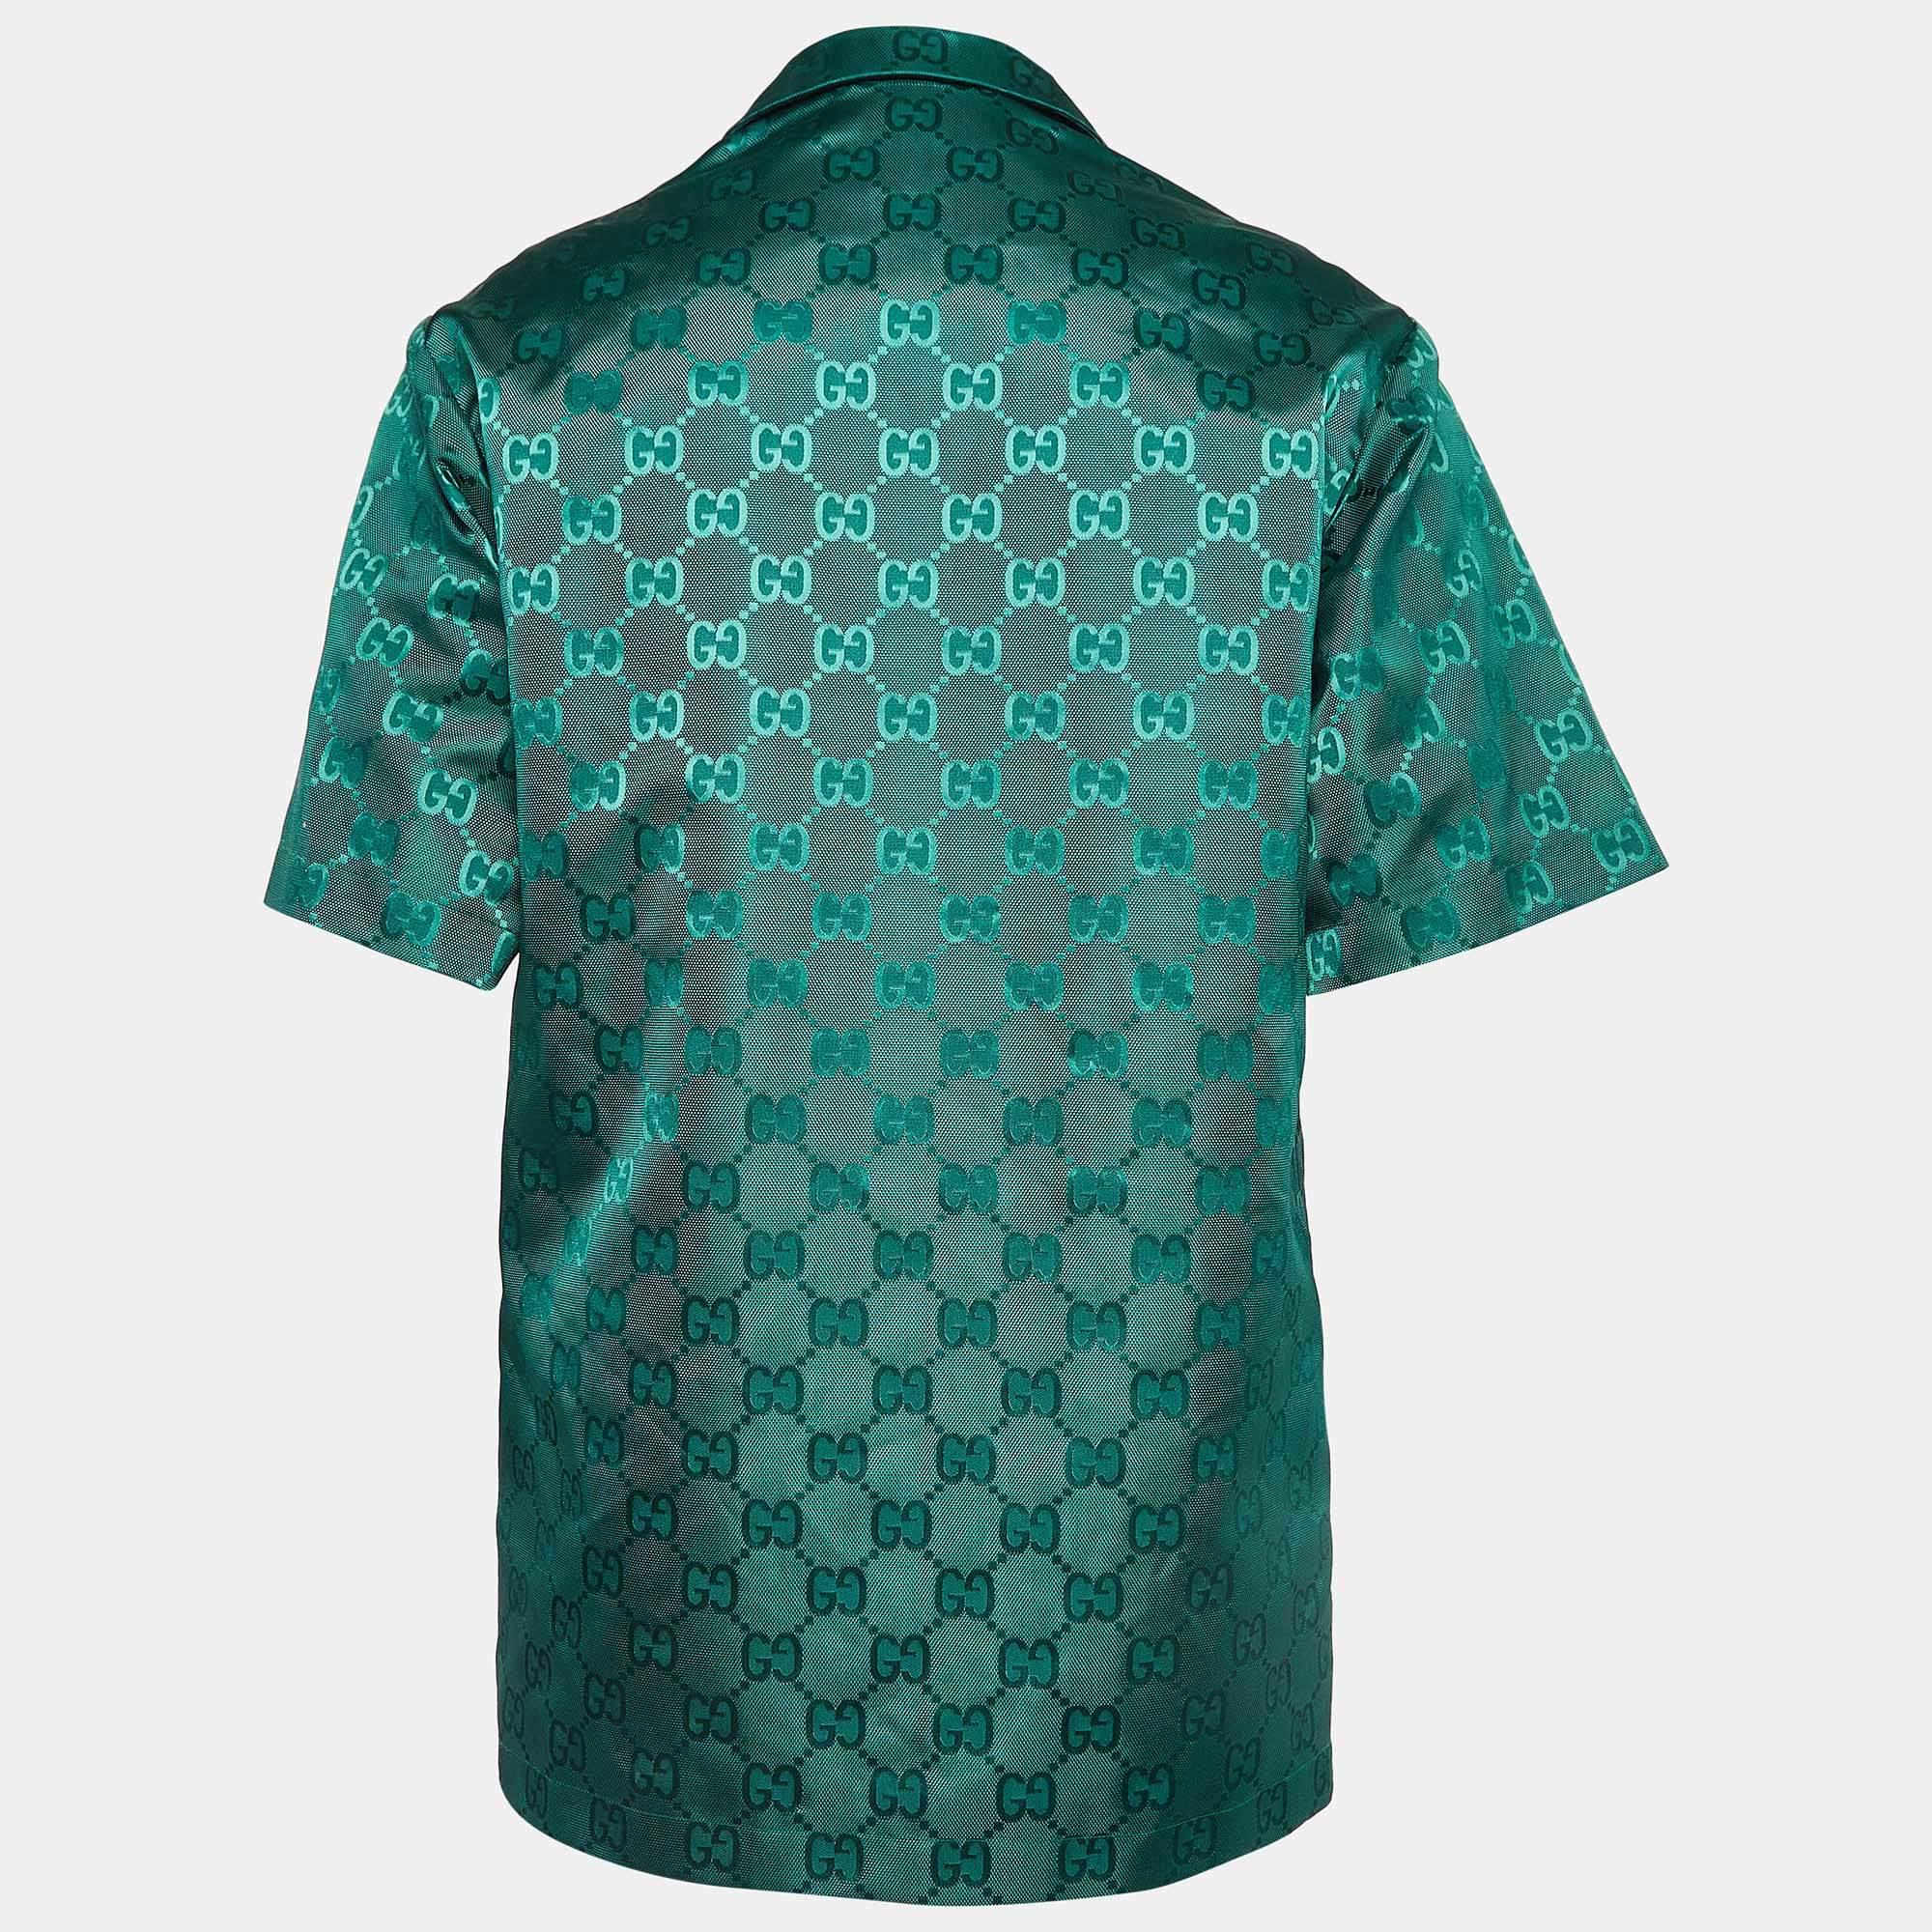 The Gucci bowling shirt epitomizes casual elegance. Crafted from quality materials, it features a green hue adorned with subtle prints. The relaxed bowling shirt silhouette is complemented by a button-down front, short sleeves, and a sophisticated